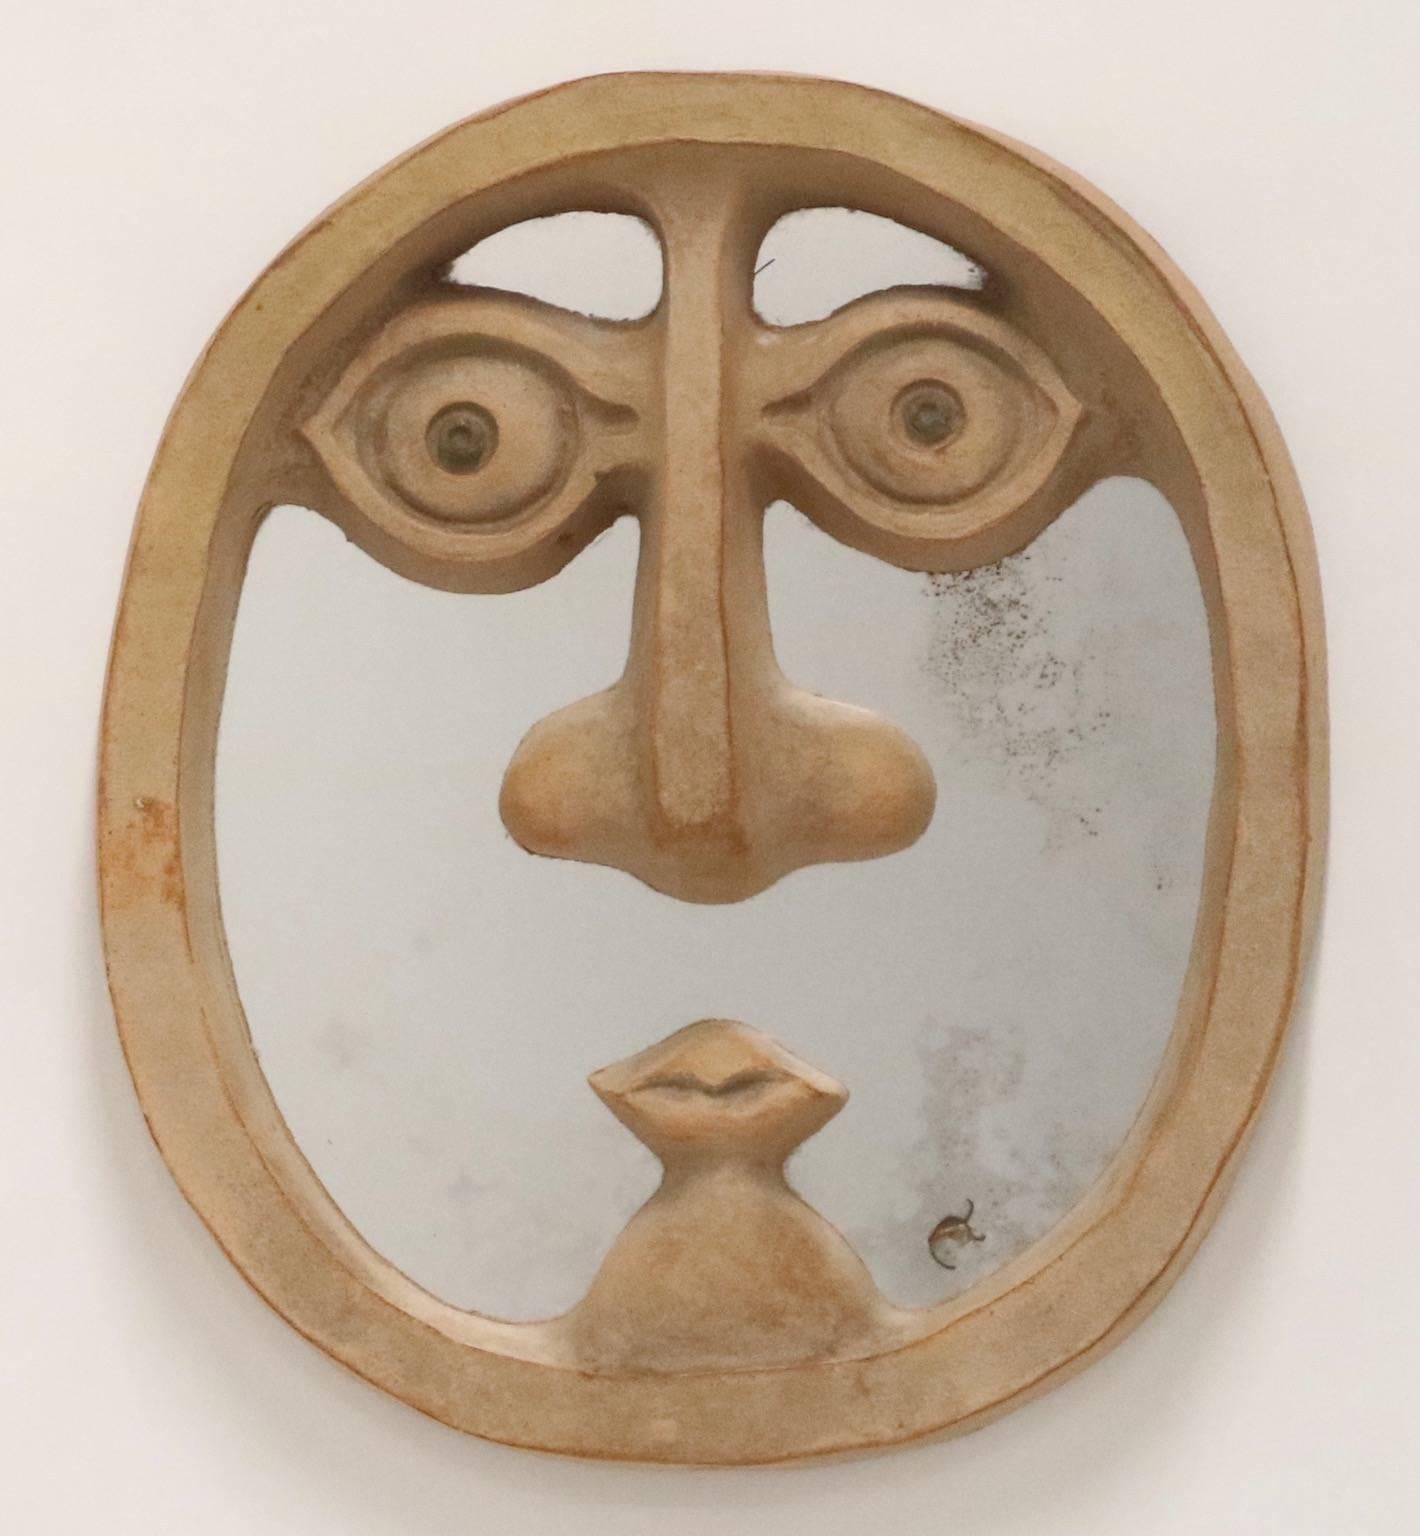 Mid-Century Modern mirror by David Gil for Bennington Pottery with unglazed ceramic stylized face. This mirror dates from the 1960s and is in good vintage condition with wear consistent with age and use. The mirror shows signs of age.